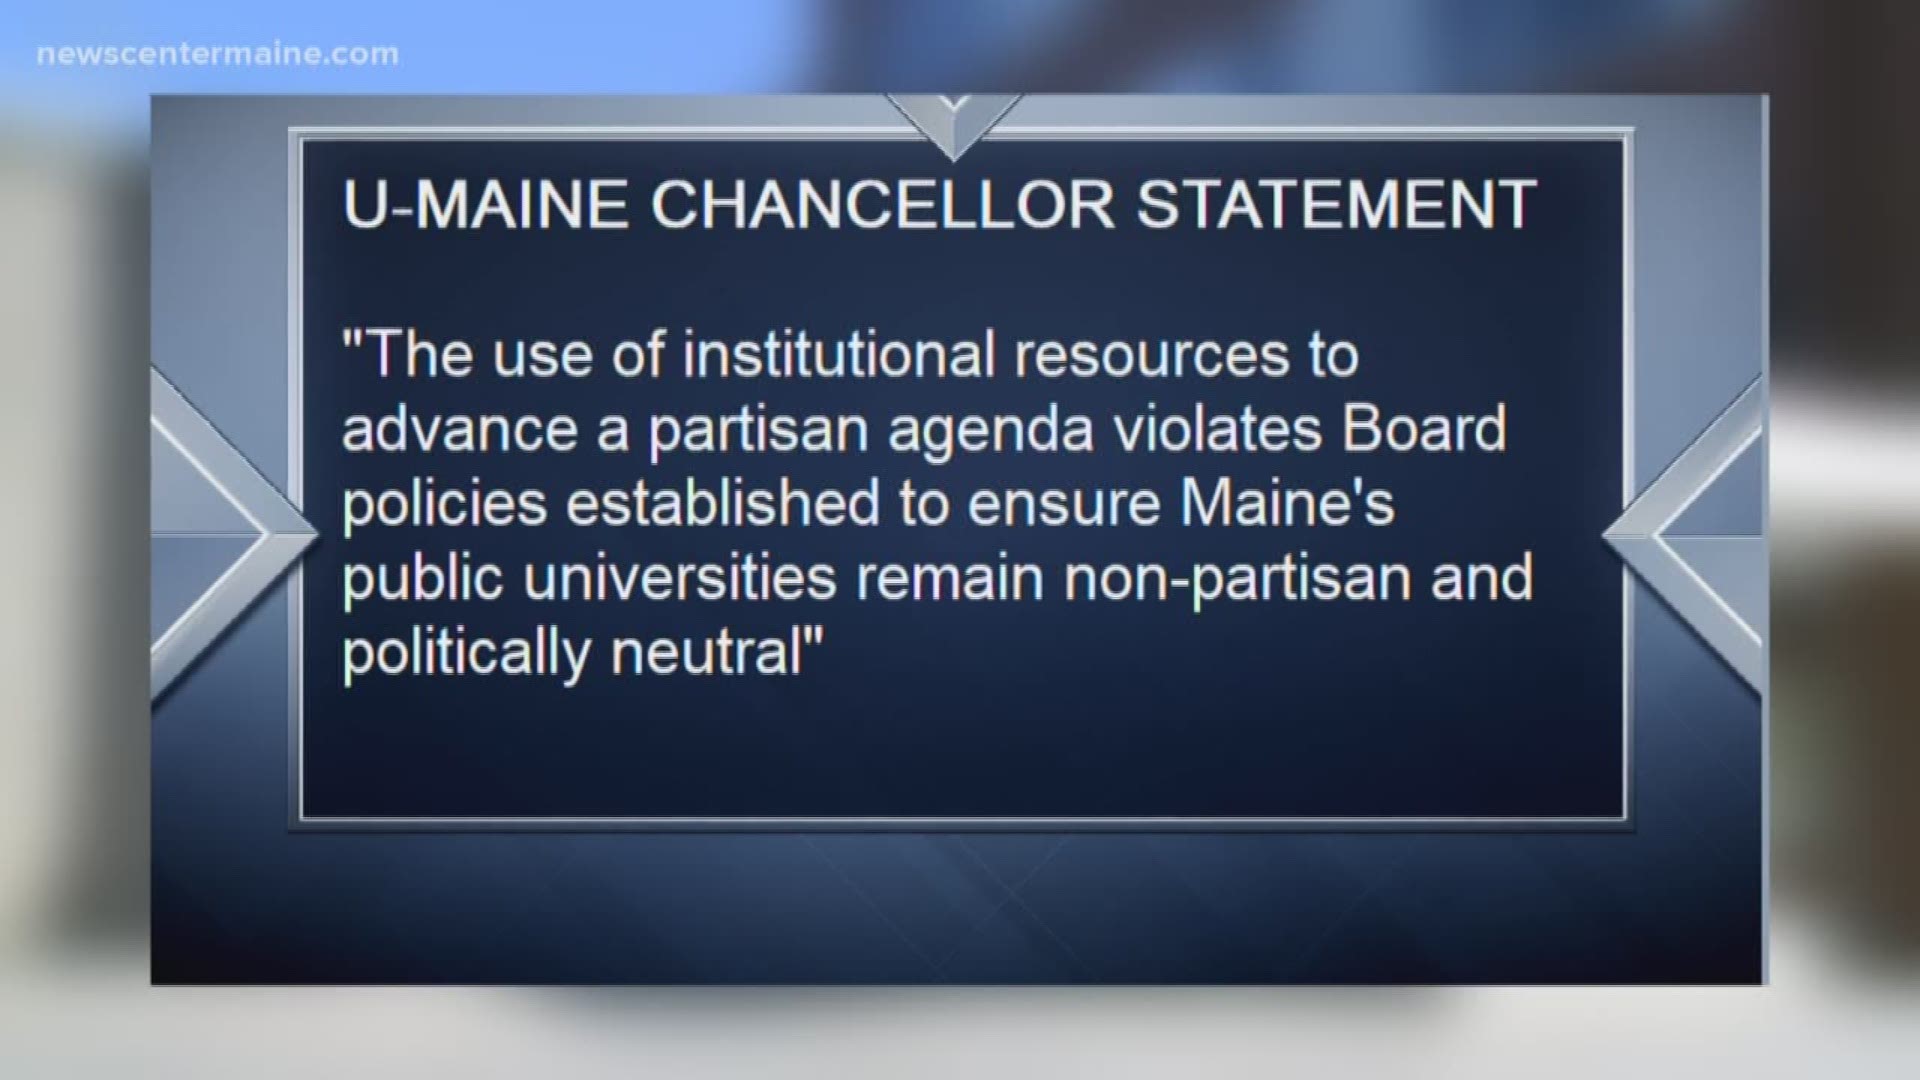 The chancellor of the U-Maine system, James page released a statement that read: "The use of institutional resources to advance a partisan agenda violates Board policies established to ensure Maine's public universities remain non-partisan and politically